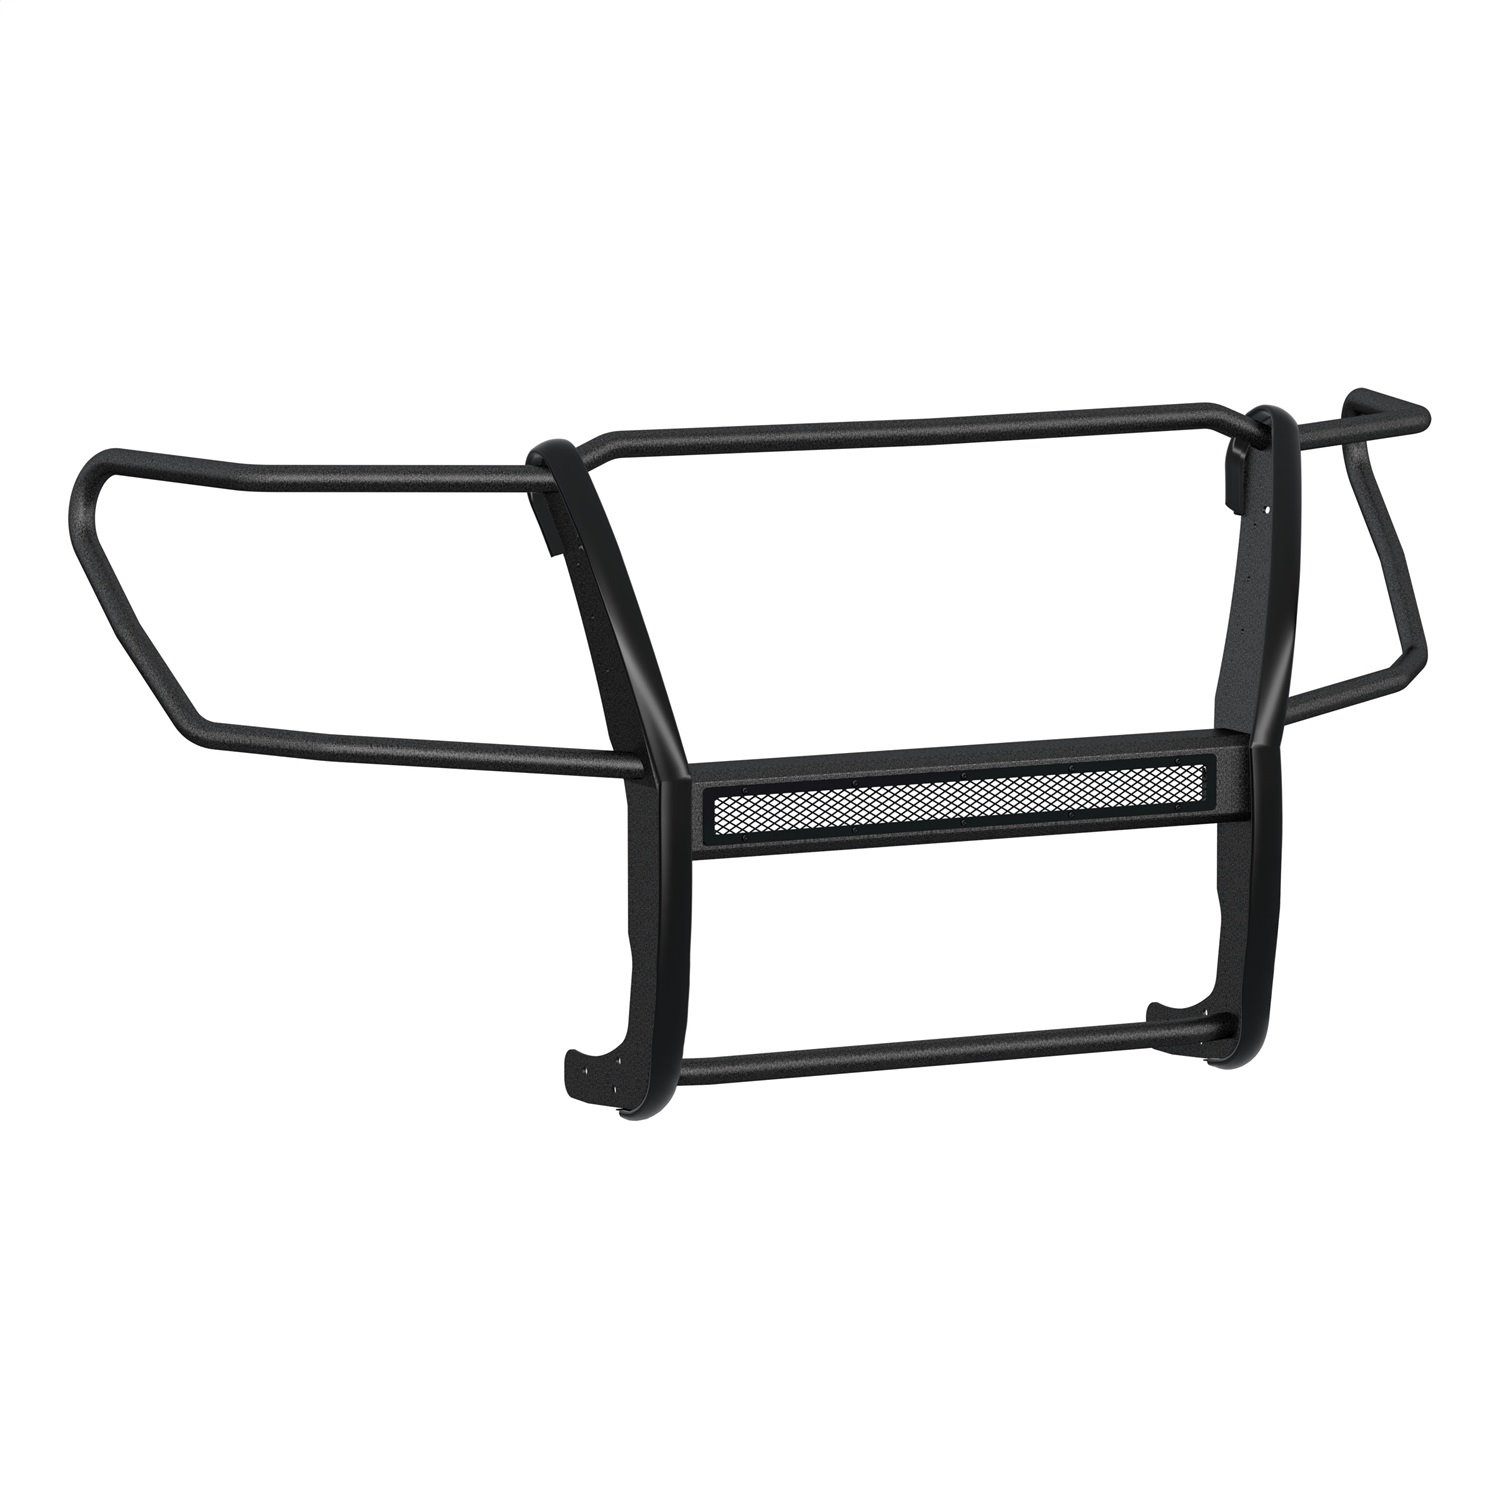 PRO SERIES GRILLE GUARD